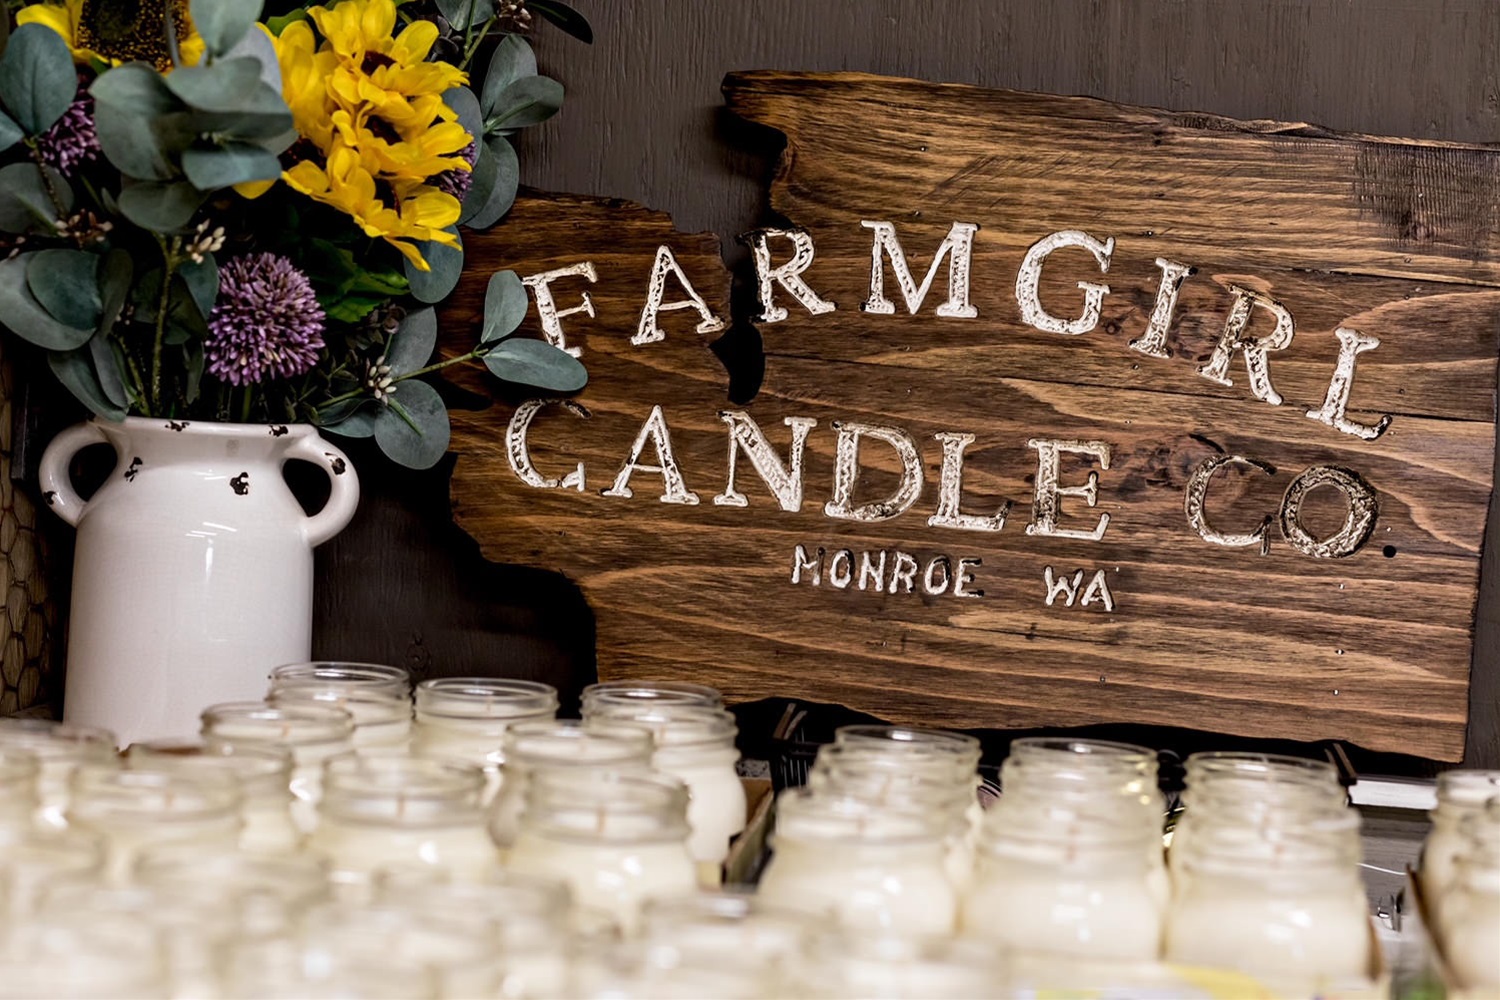 Candles For A Cause- Farmgirl Fundraiser Candles